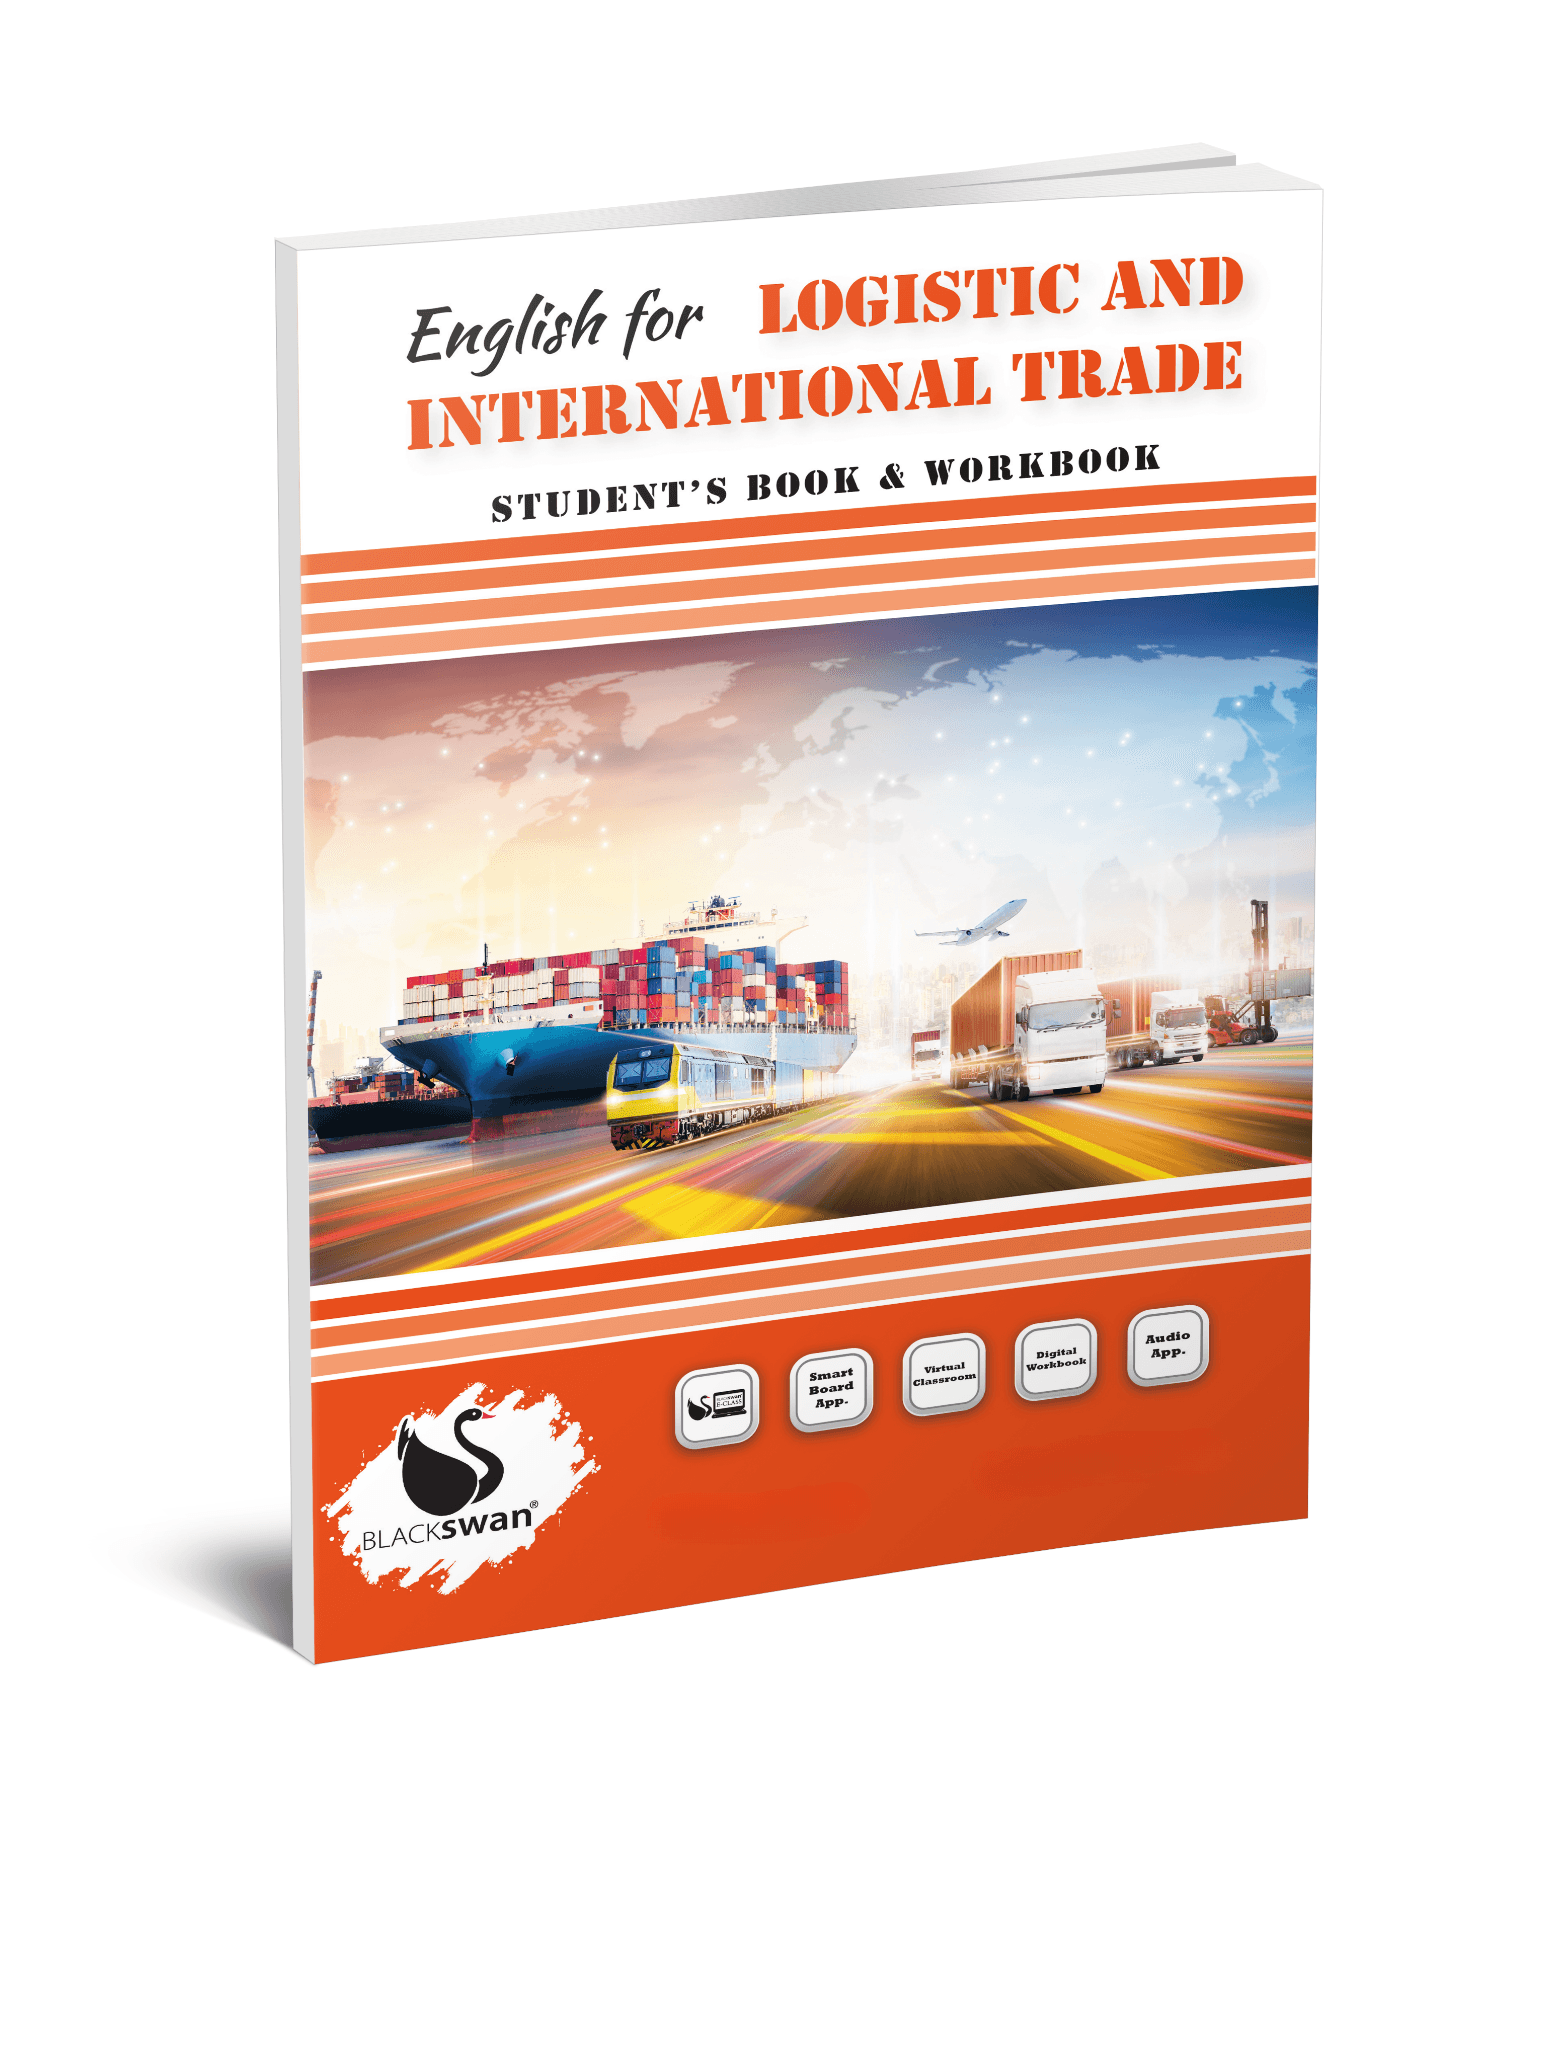 English for Logistic and International Trade Student's Book & Workbook